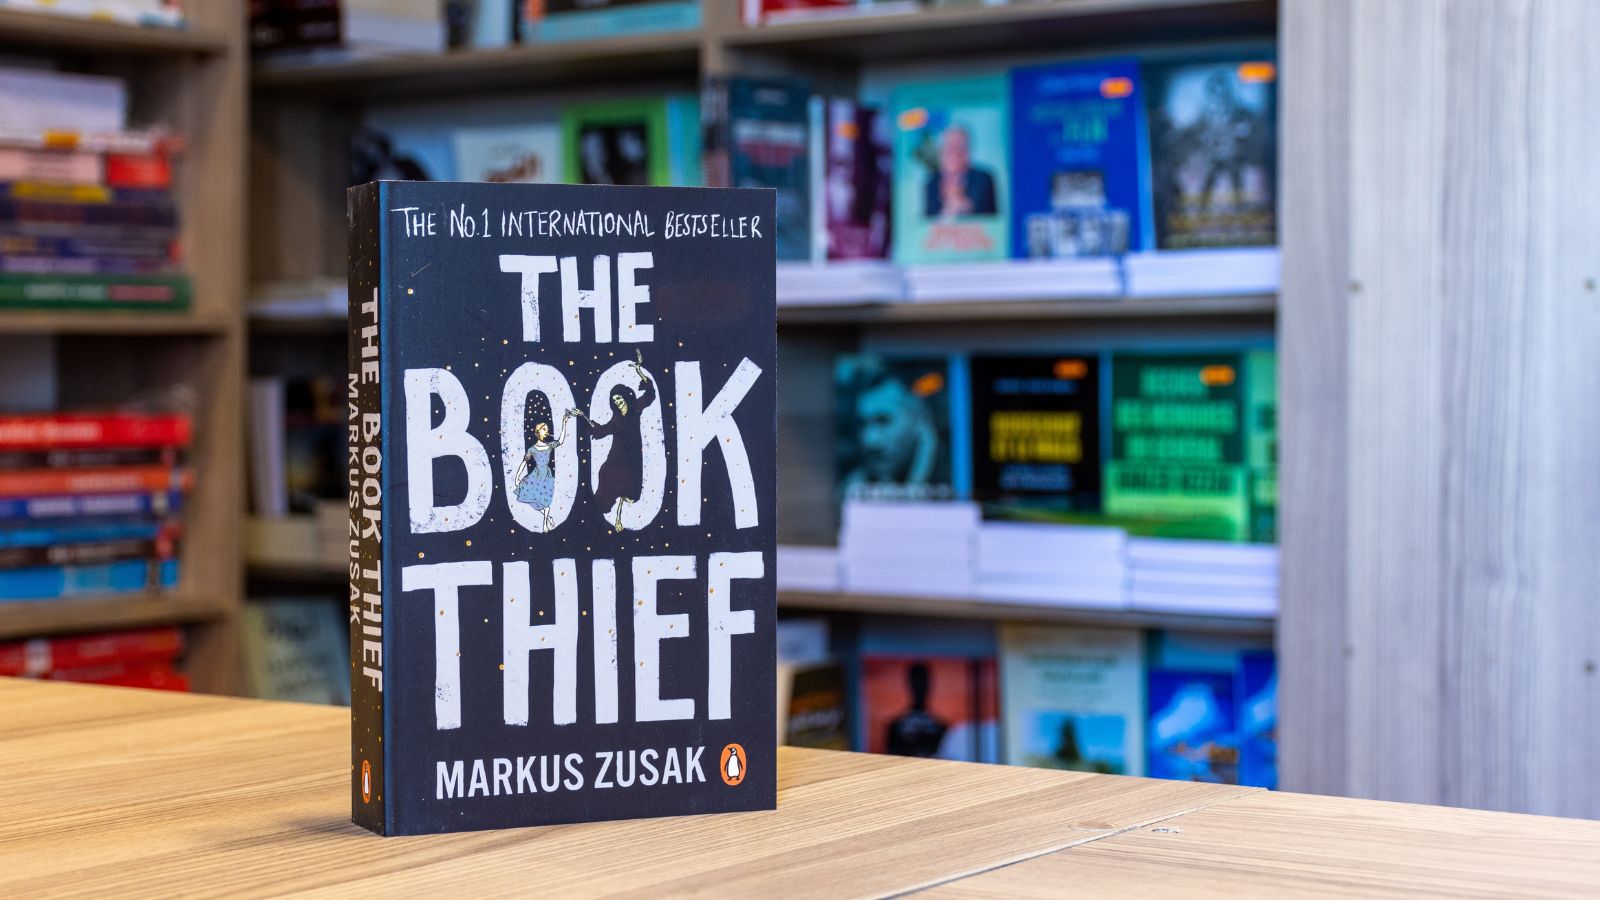 <p>The Book Thief is another story about the power of words and the solace they provide. This tale is set against the haunting backdrop of Nazi Germany, with the young protagonist's family hiding a Jewish man and subsequently putting themselves at risk. Both the book itself and the stories inside it teach the significance of words in teaching us humanity.</p>